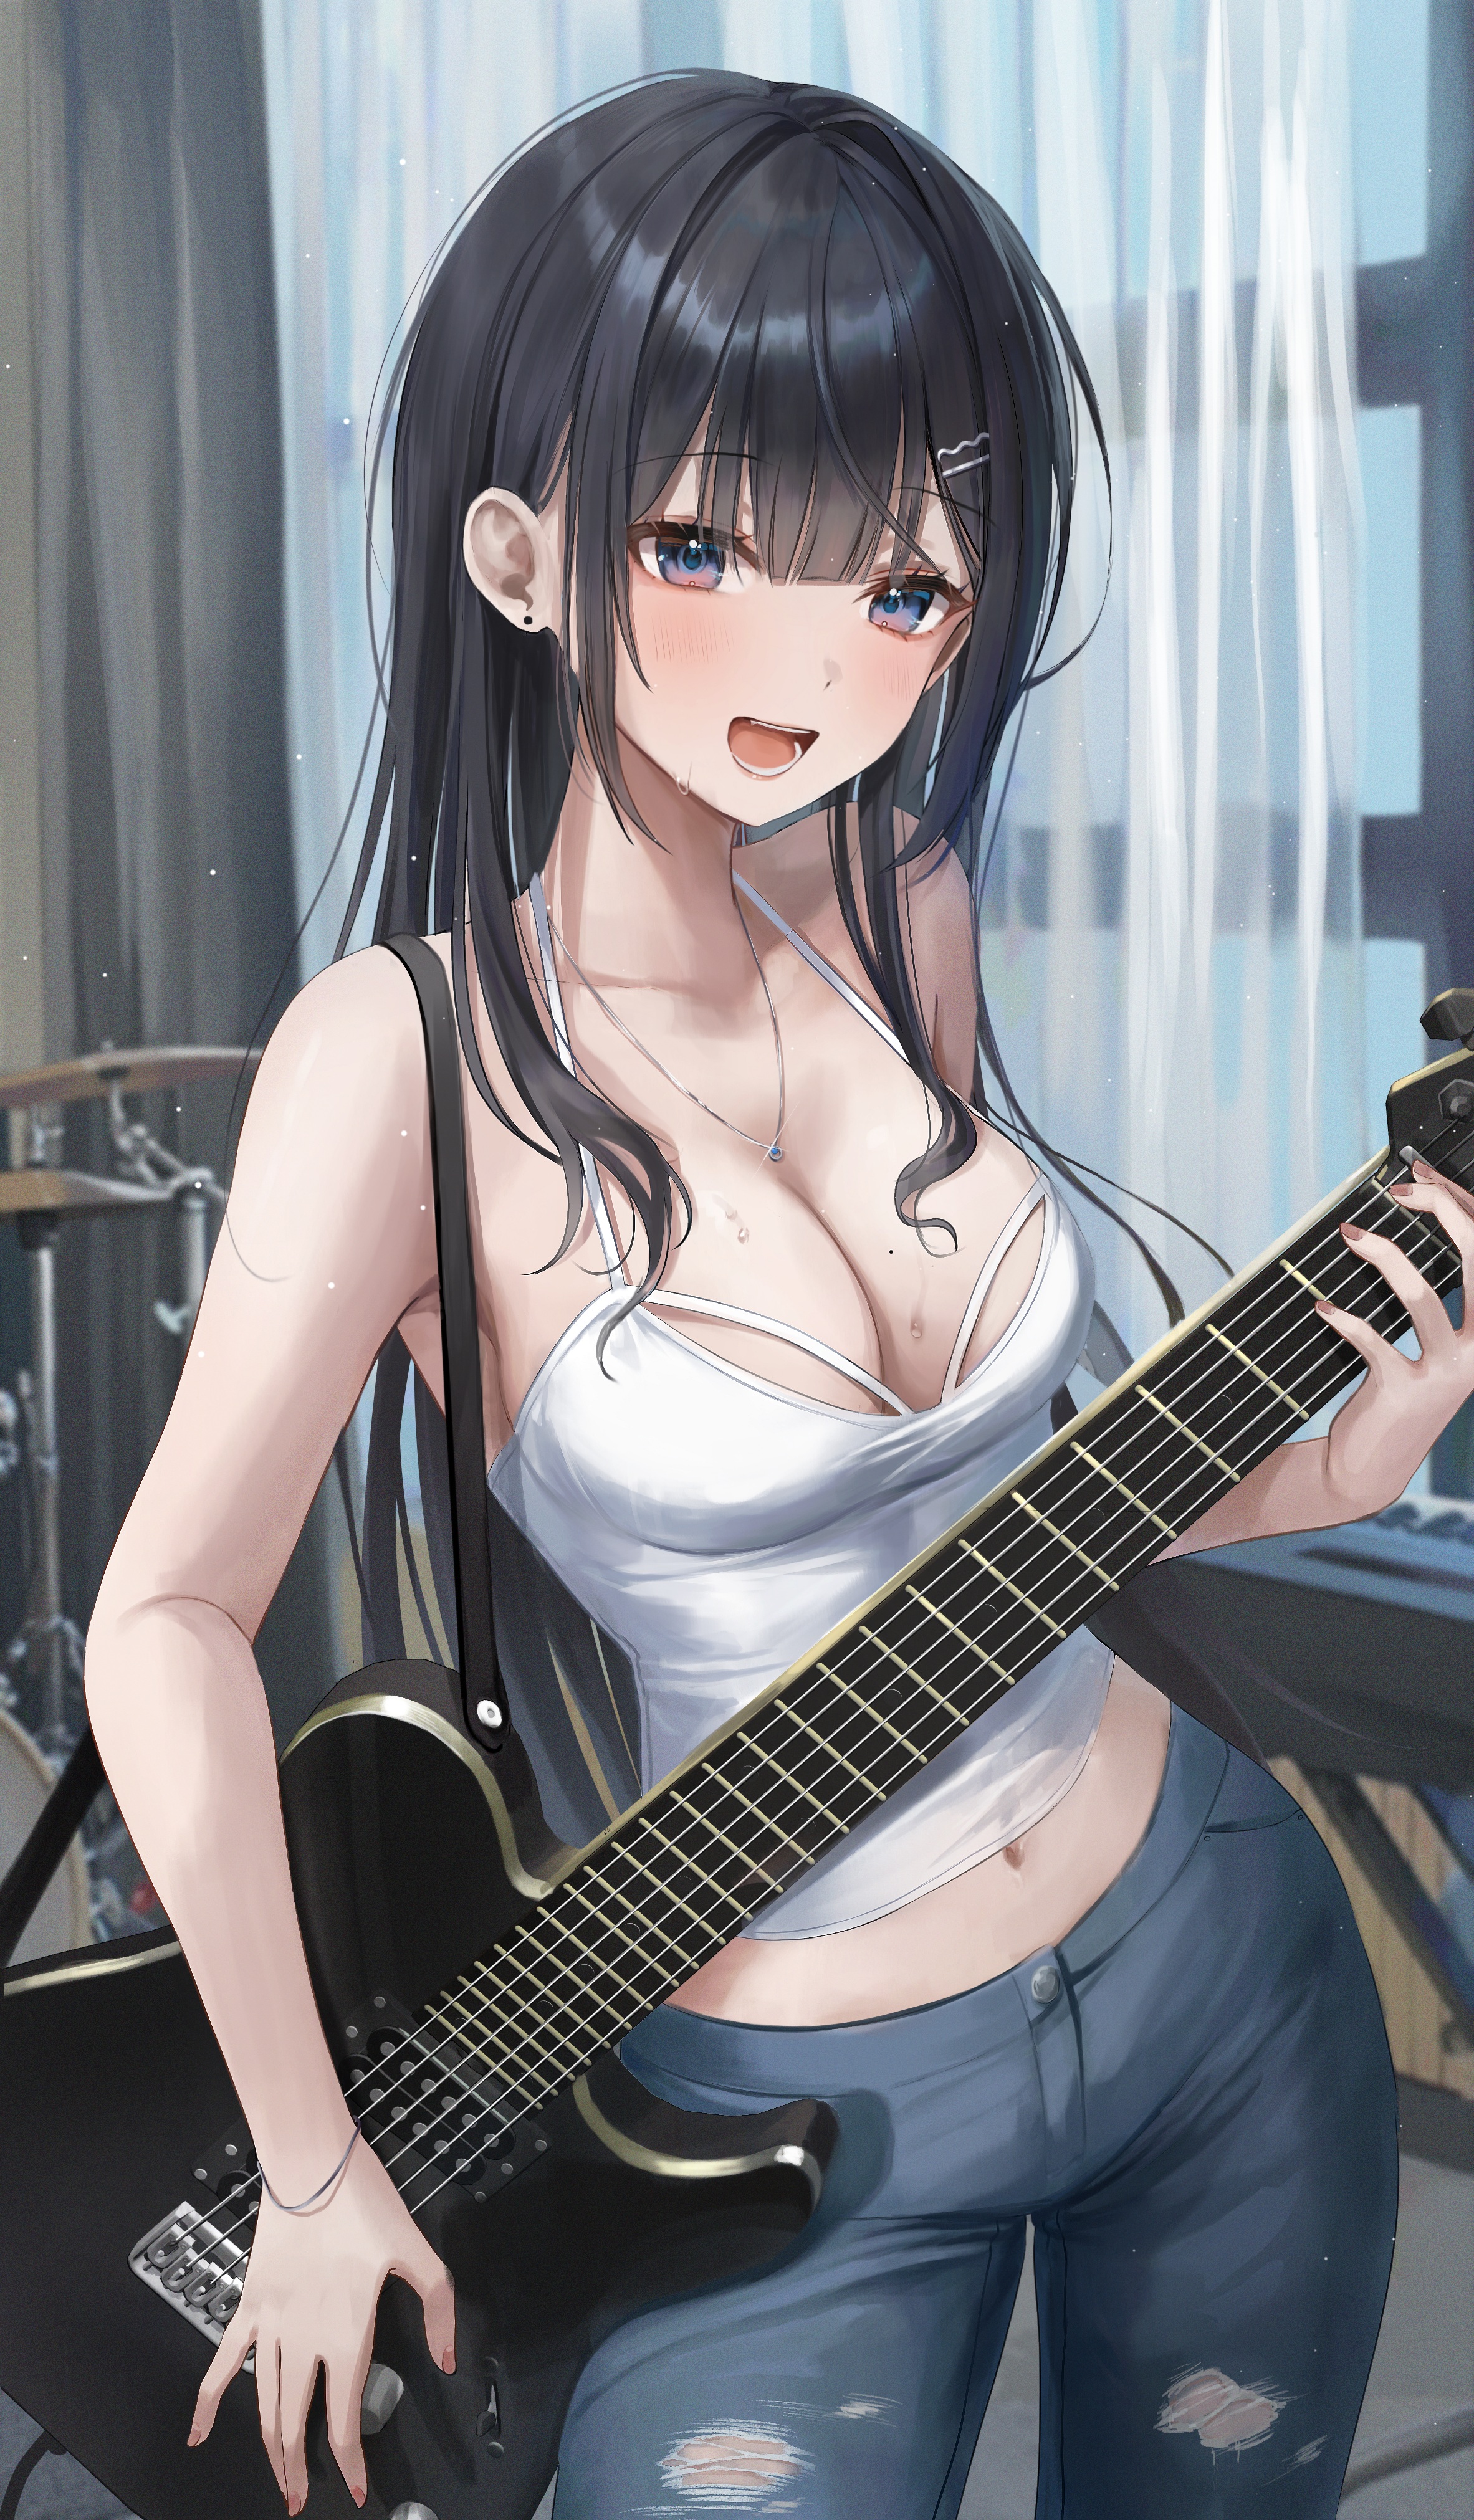 Anime 2365x4044 anime anime girls guitar cleavage artwork Myowa portrait display blushing open mouth long hair indoors women indoors bass guitars big boobs belly button collarbone bare shoulders straps hair ornament bangs musical instrument piano torn jeans jeans no bra